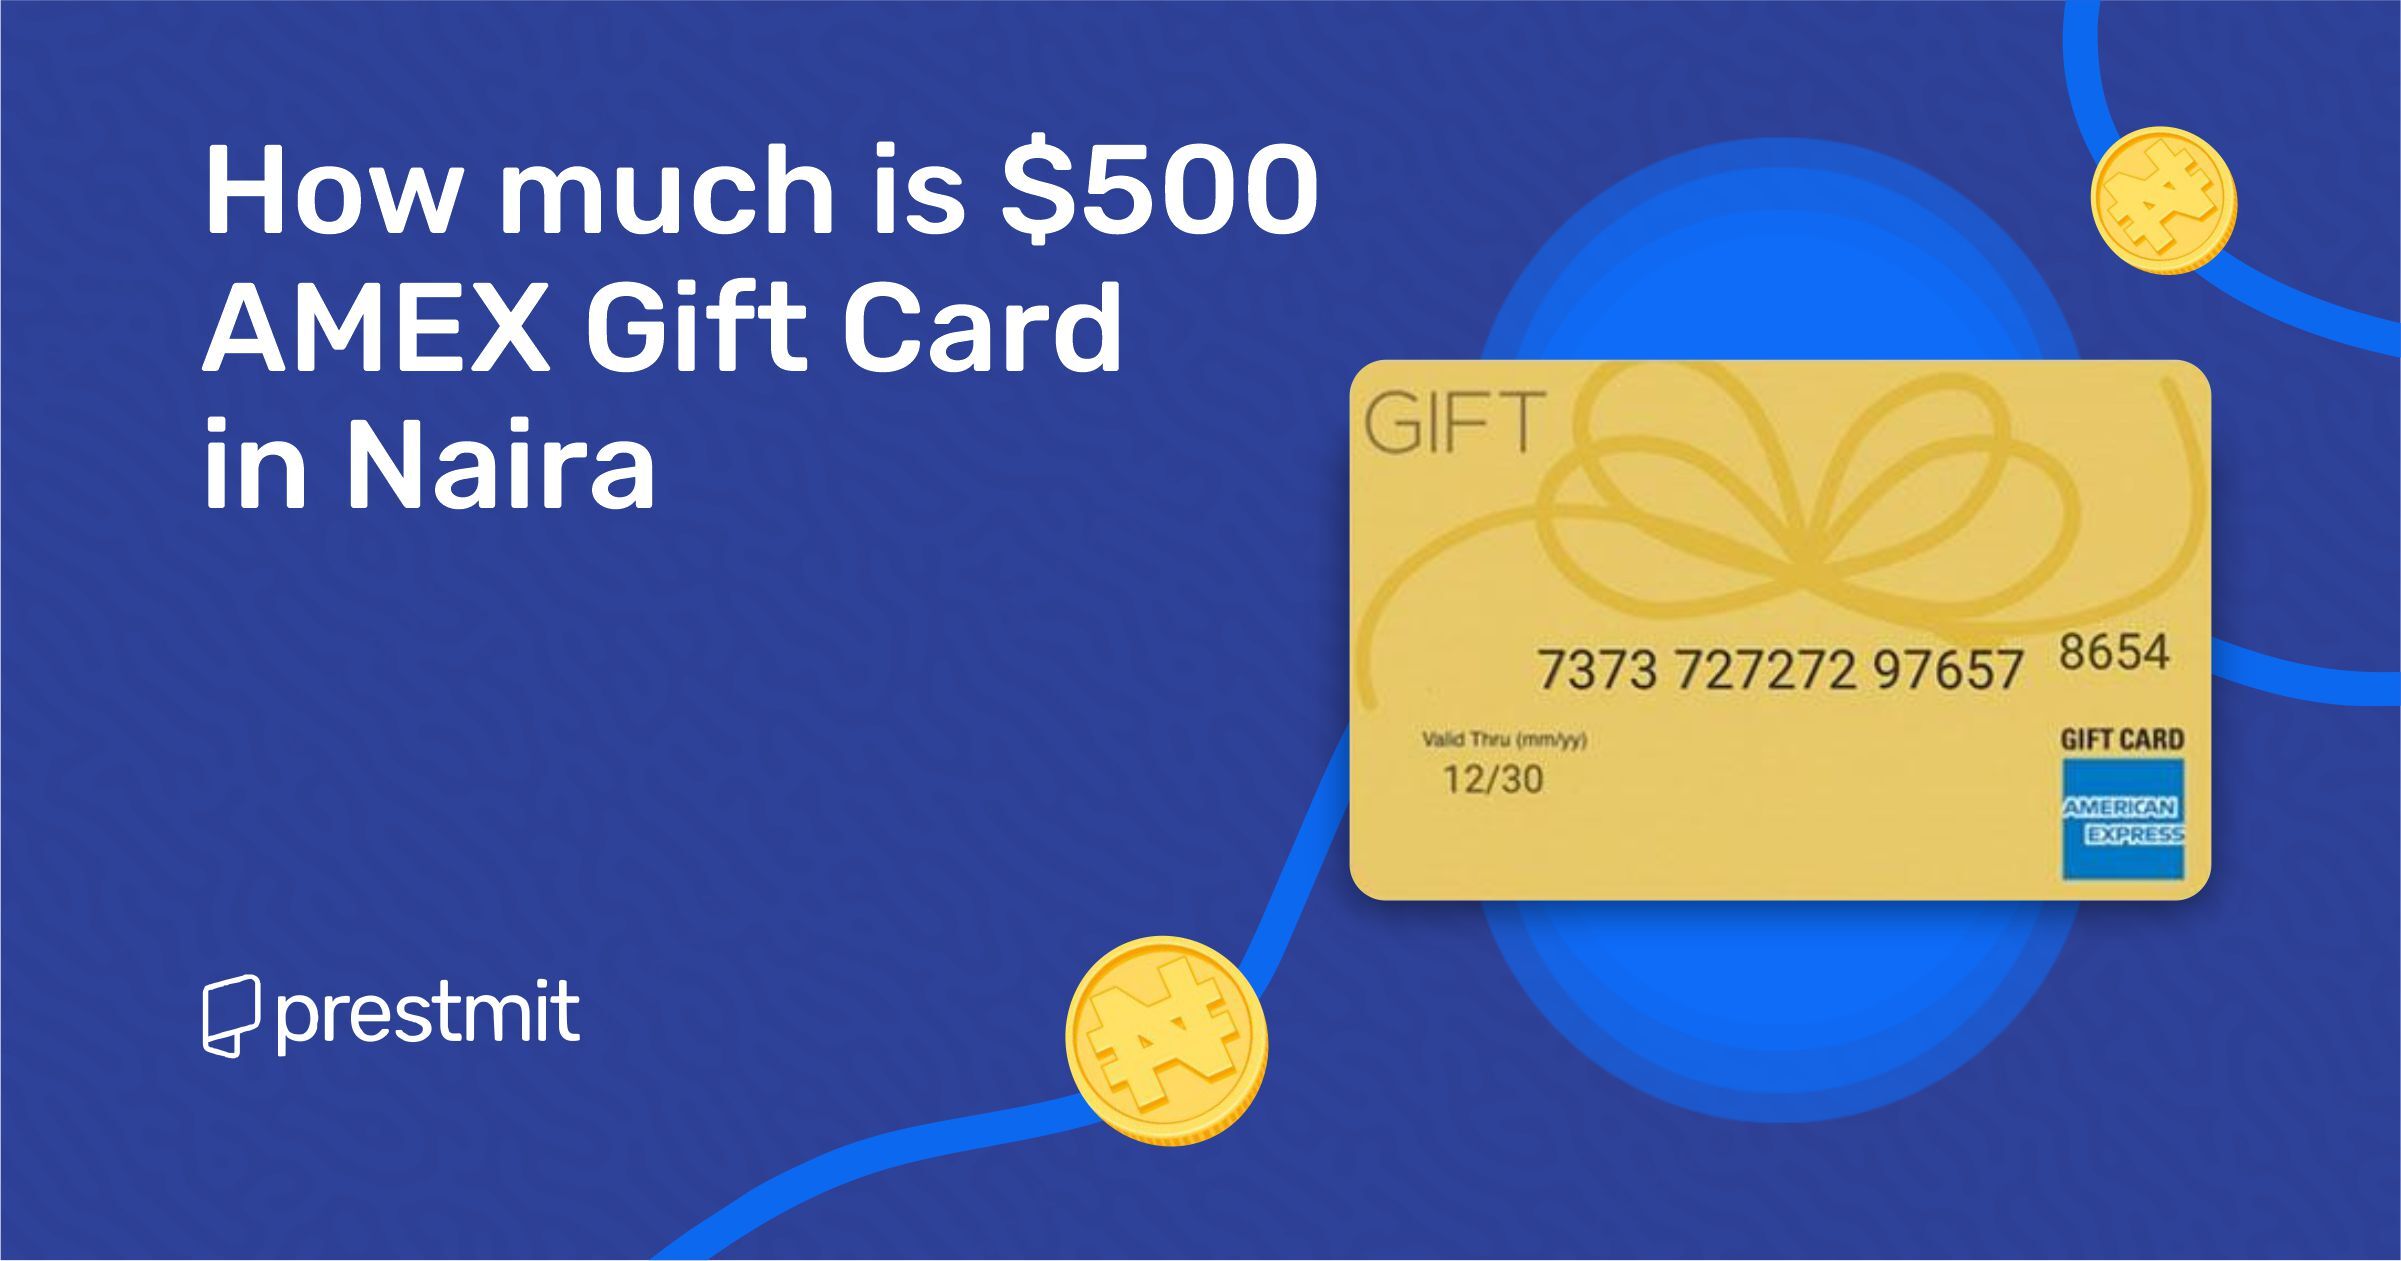 How to Use a Mastercard, Visa or Amex Gift Card on Amazon - Techlicious